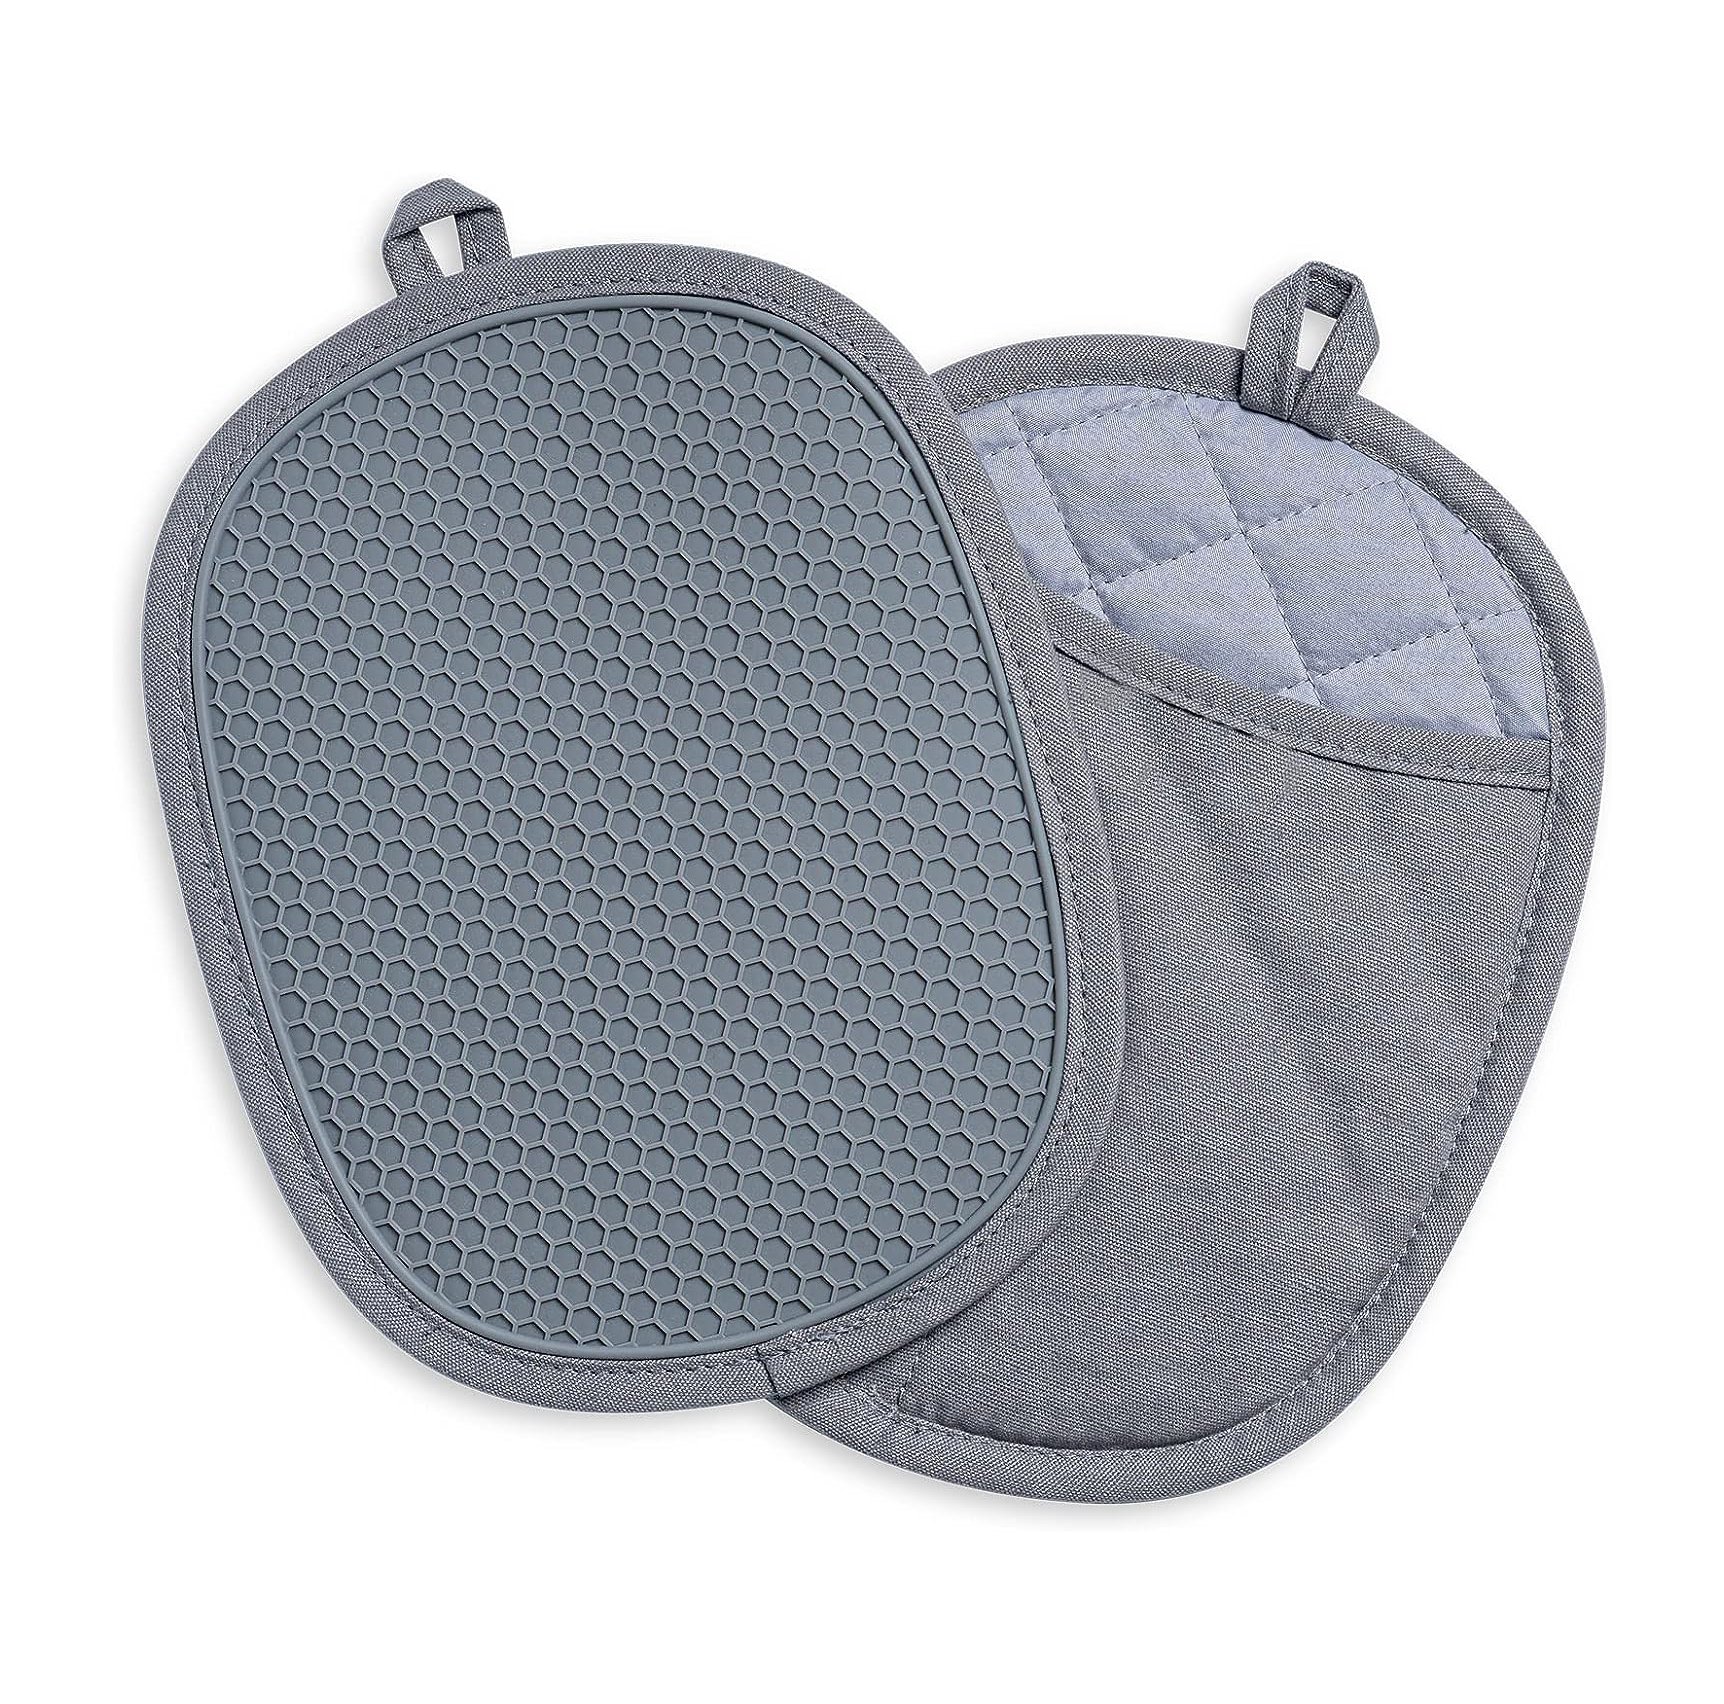 Heat Resistant Oven Hot Pads with Pockets